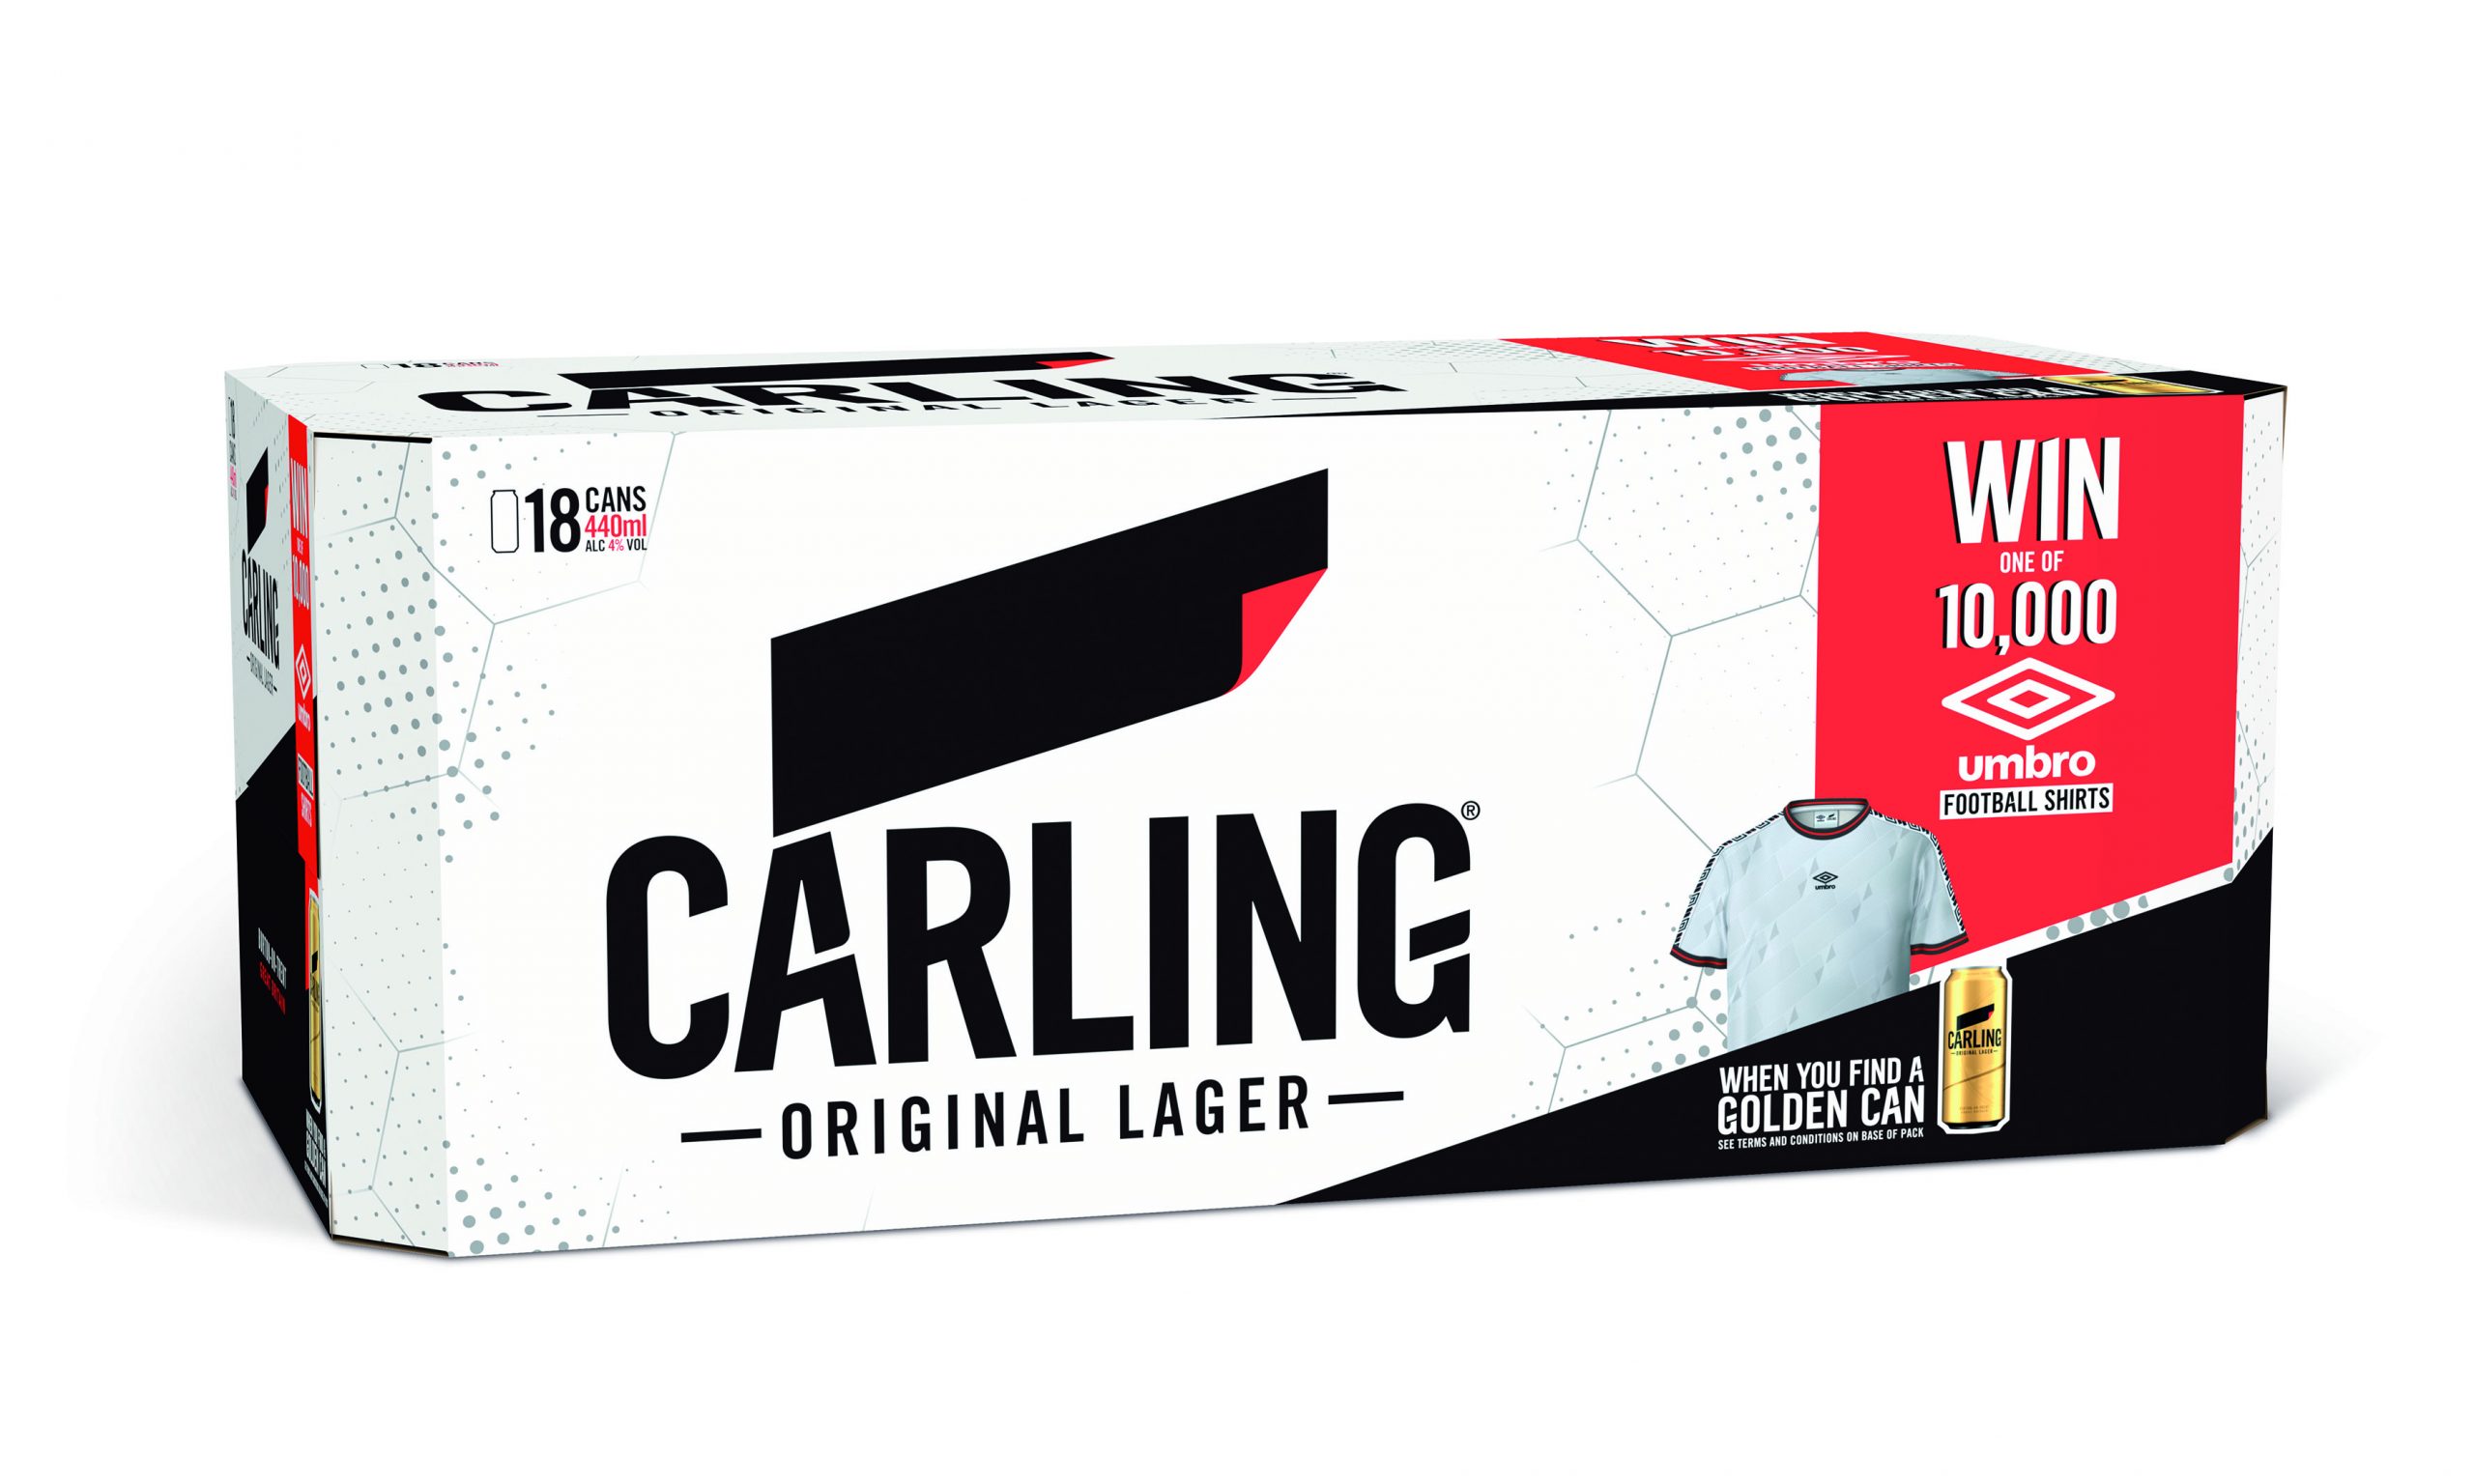 Carling gives football fans Umbro promo goal opportunity